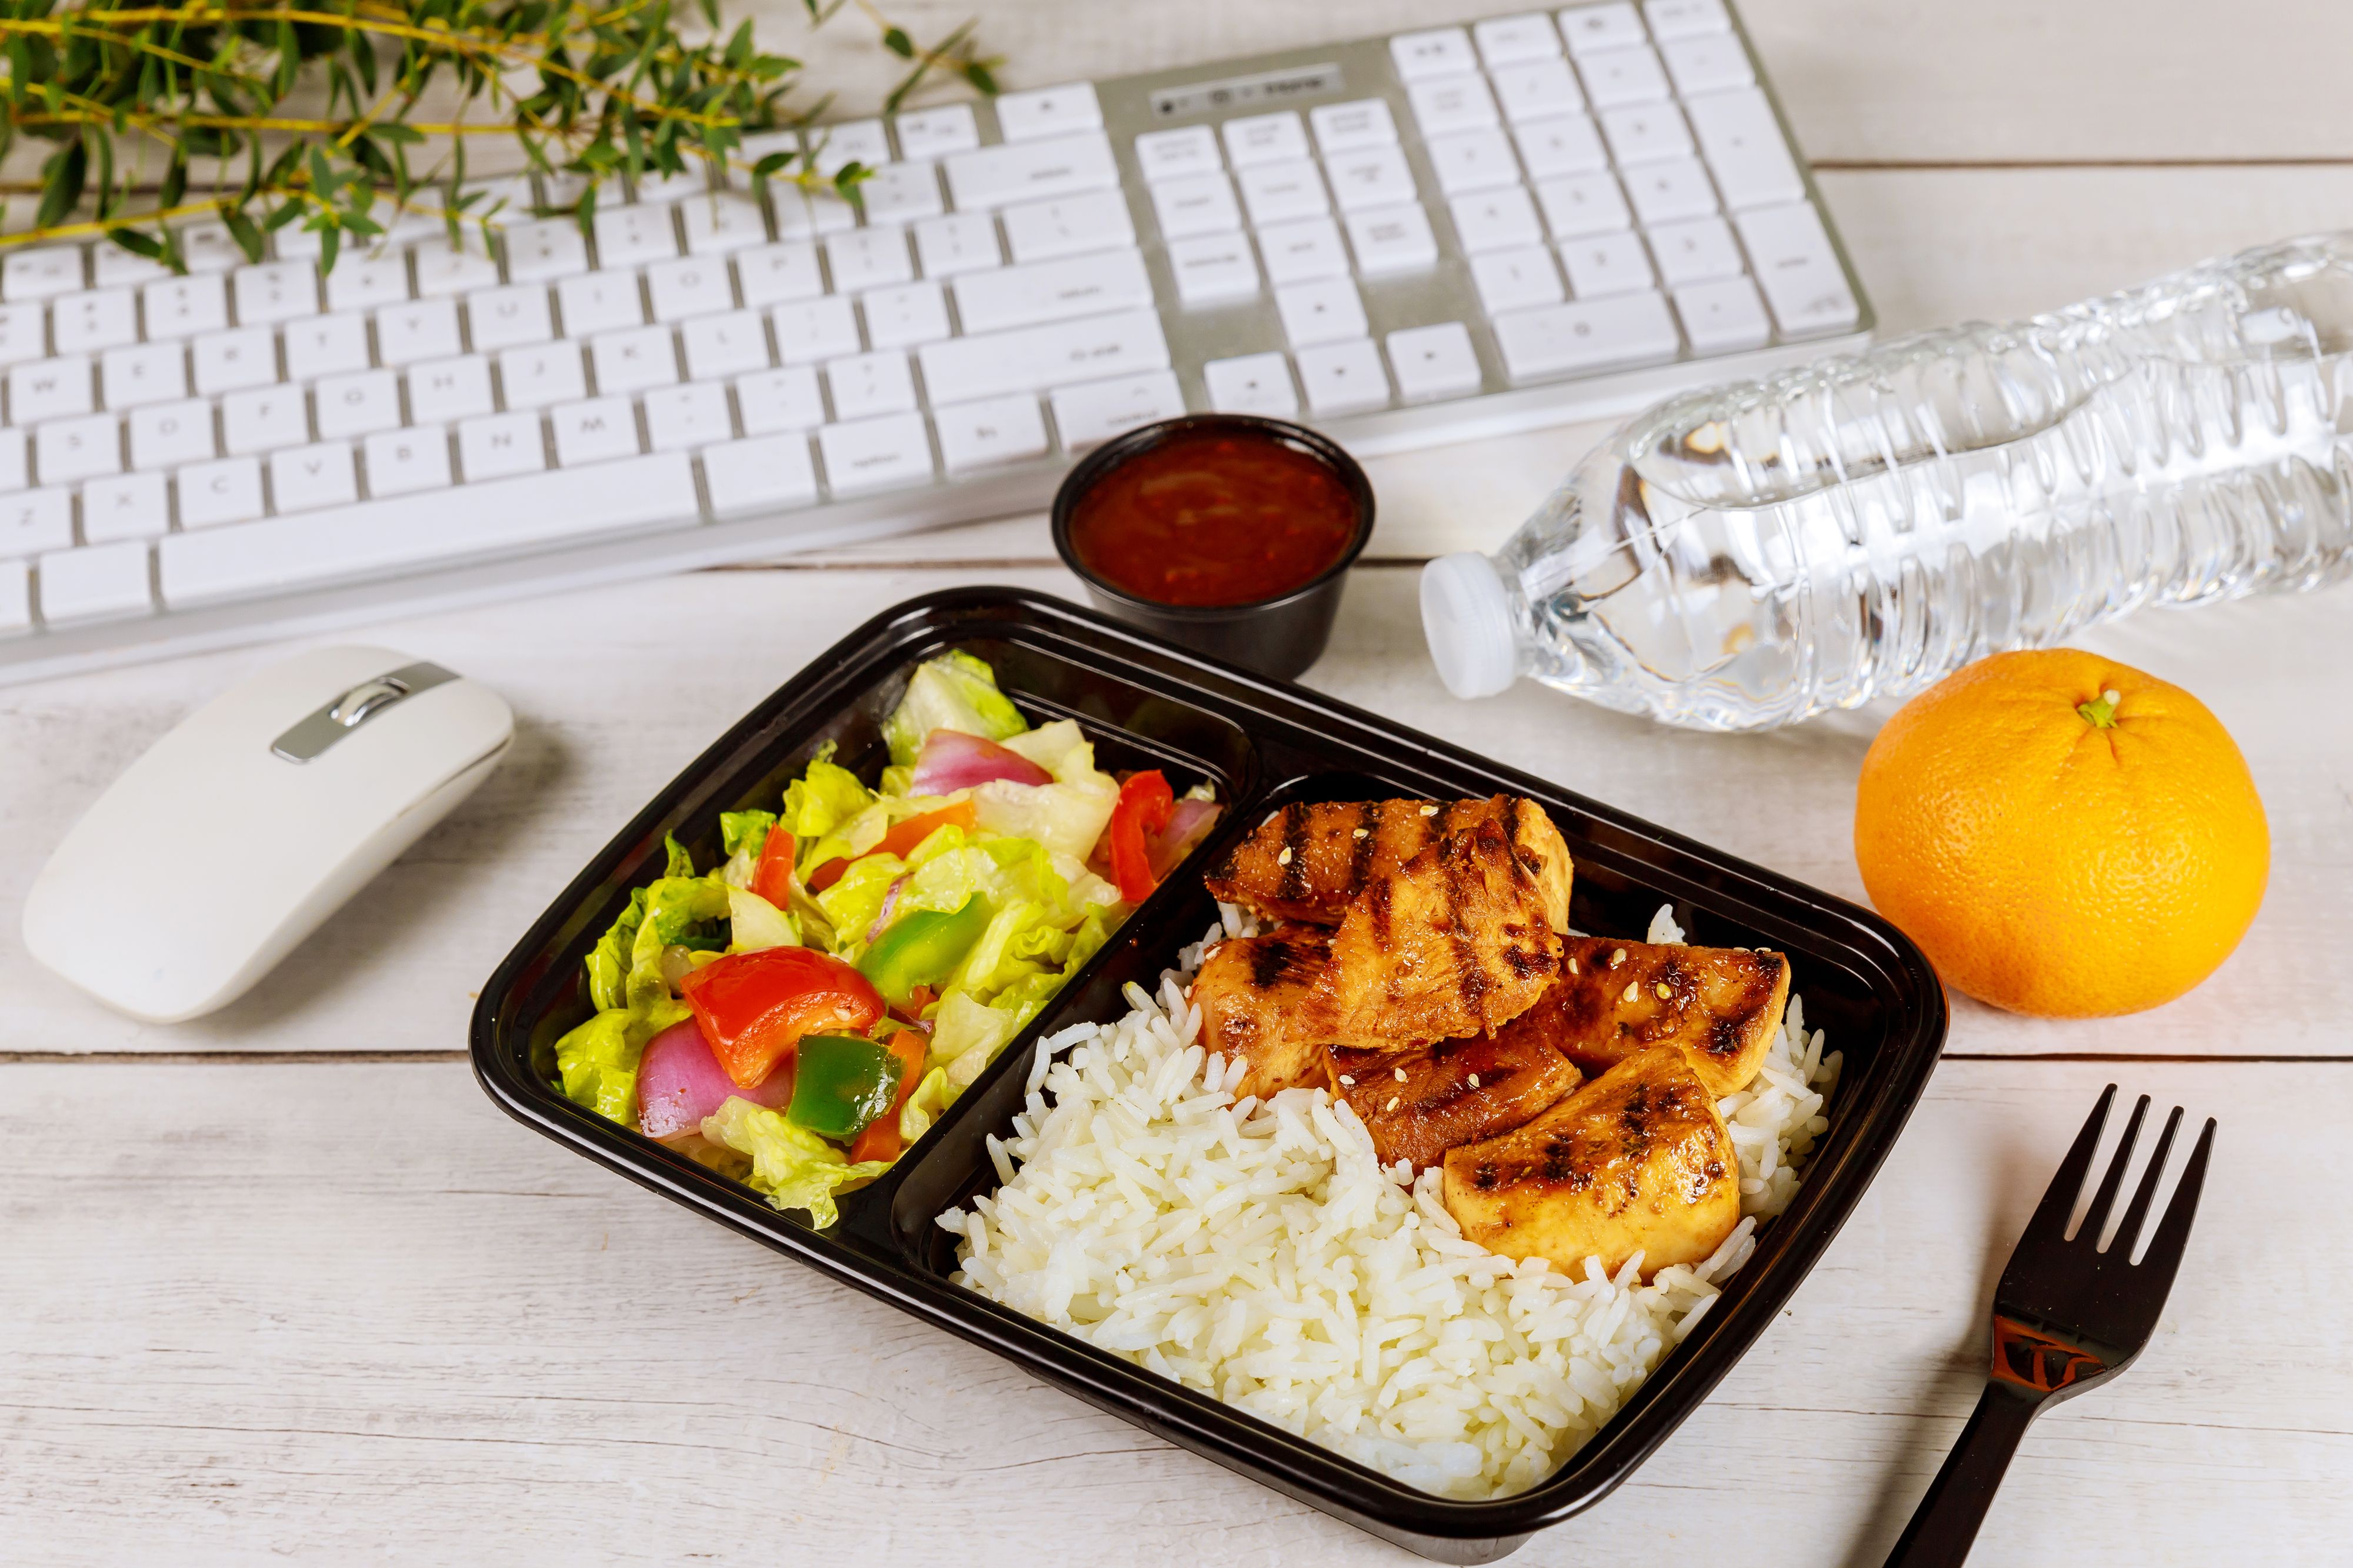 Boxed meal at desk in front of keyboard and mouse